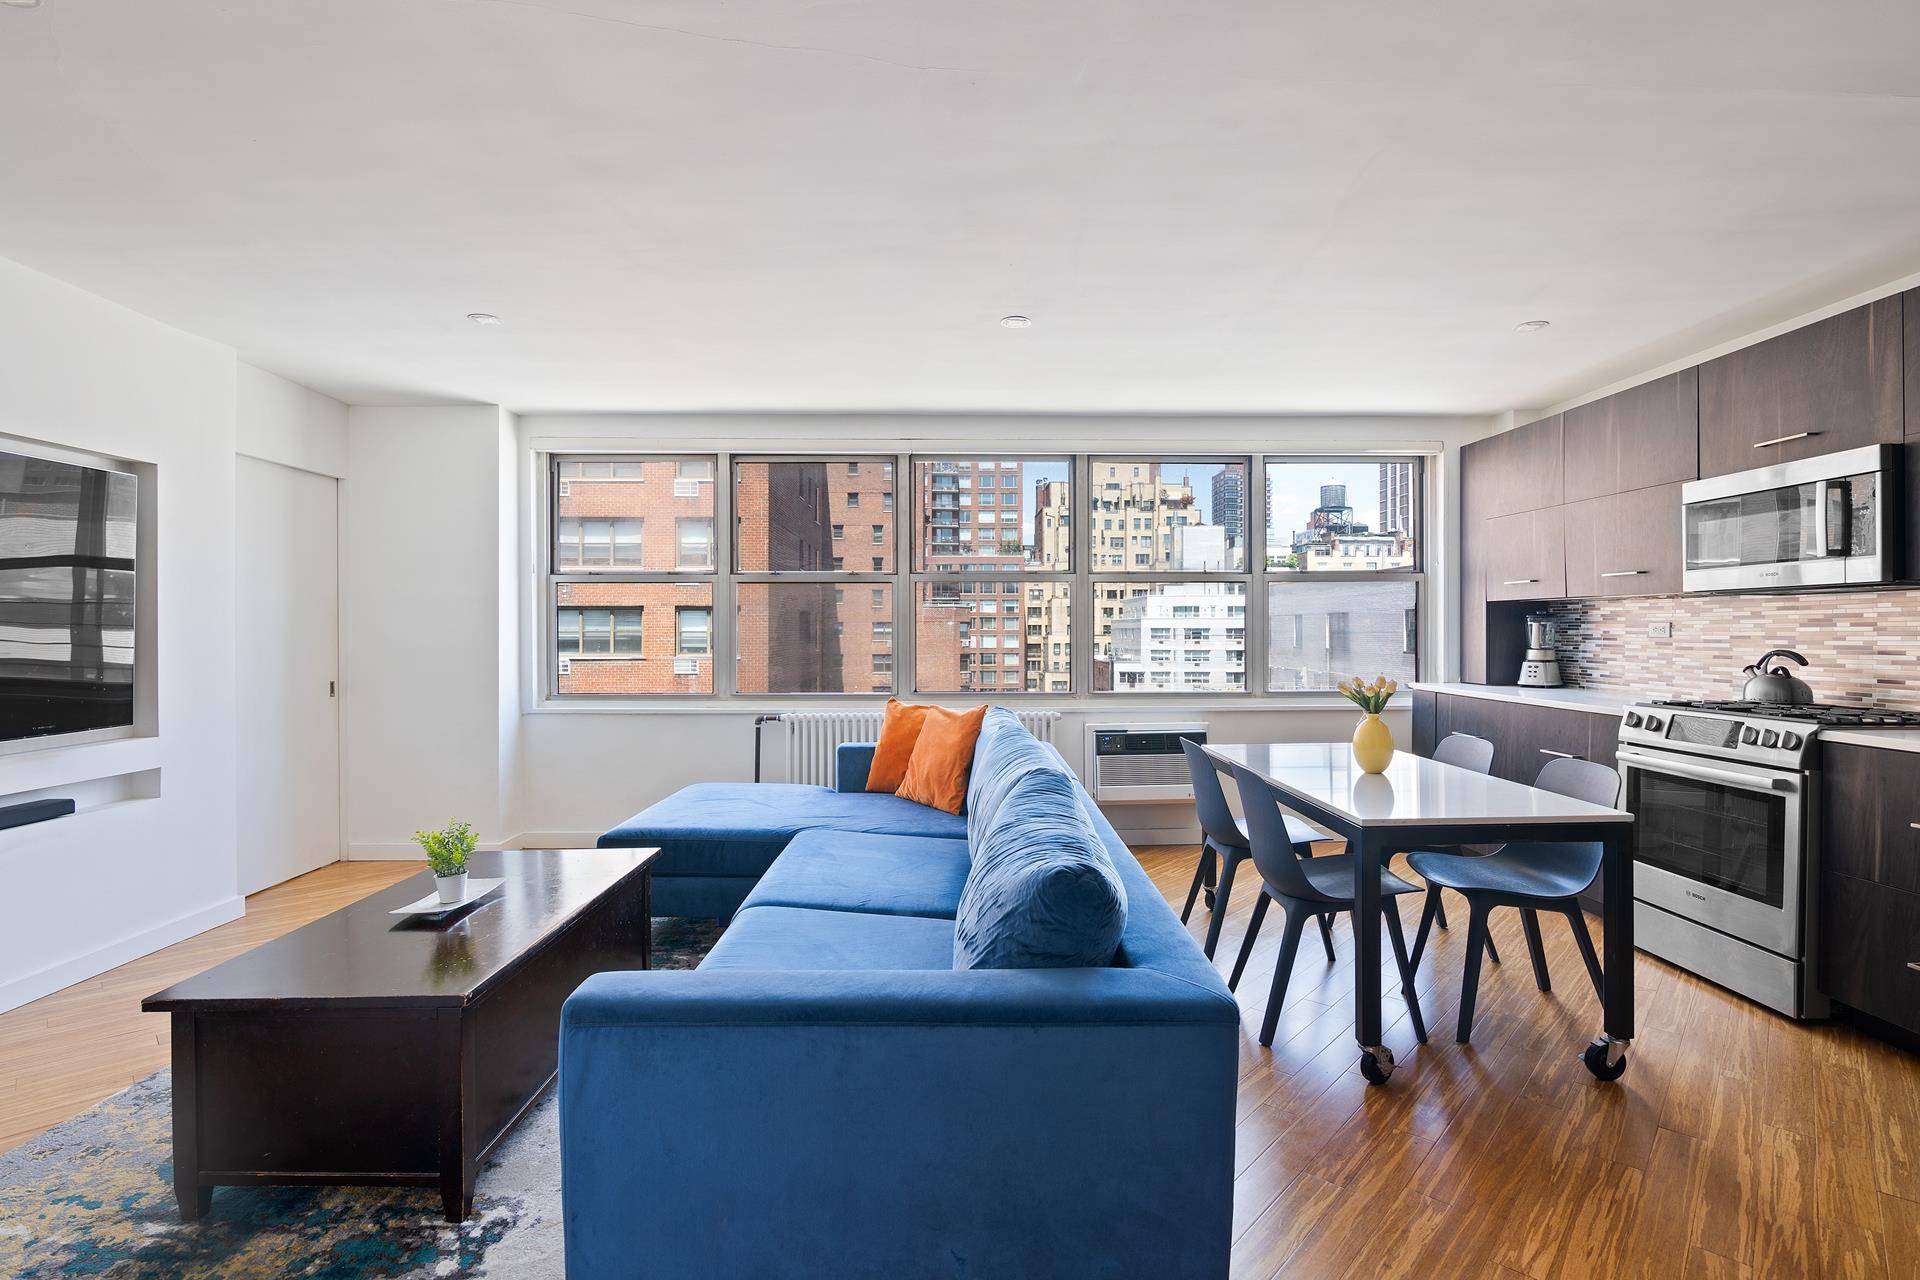 This approximately 900 SF penthouse corner apartment with unobstructed open views has been completely and lovingly gut renovated down to the studs.